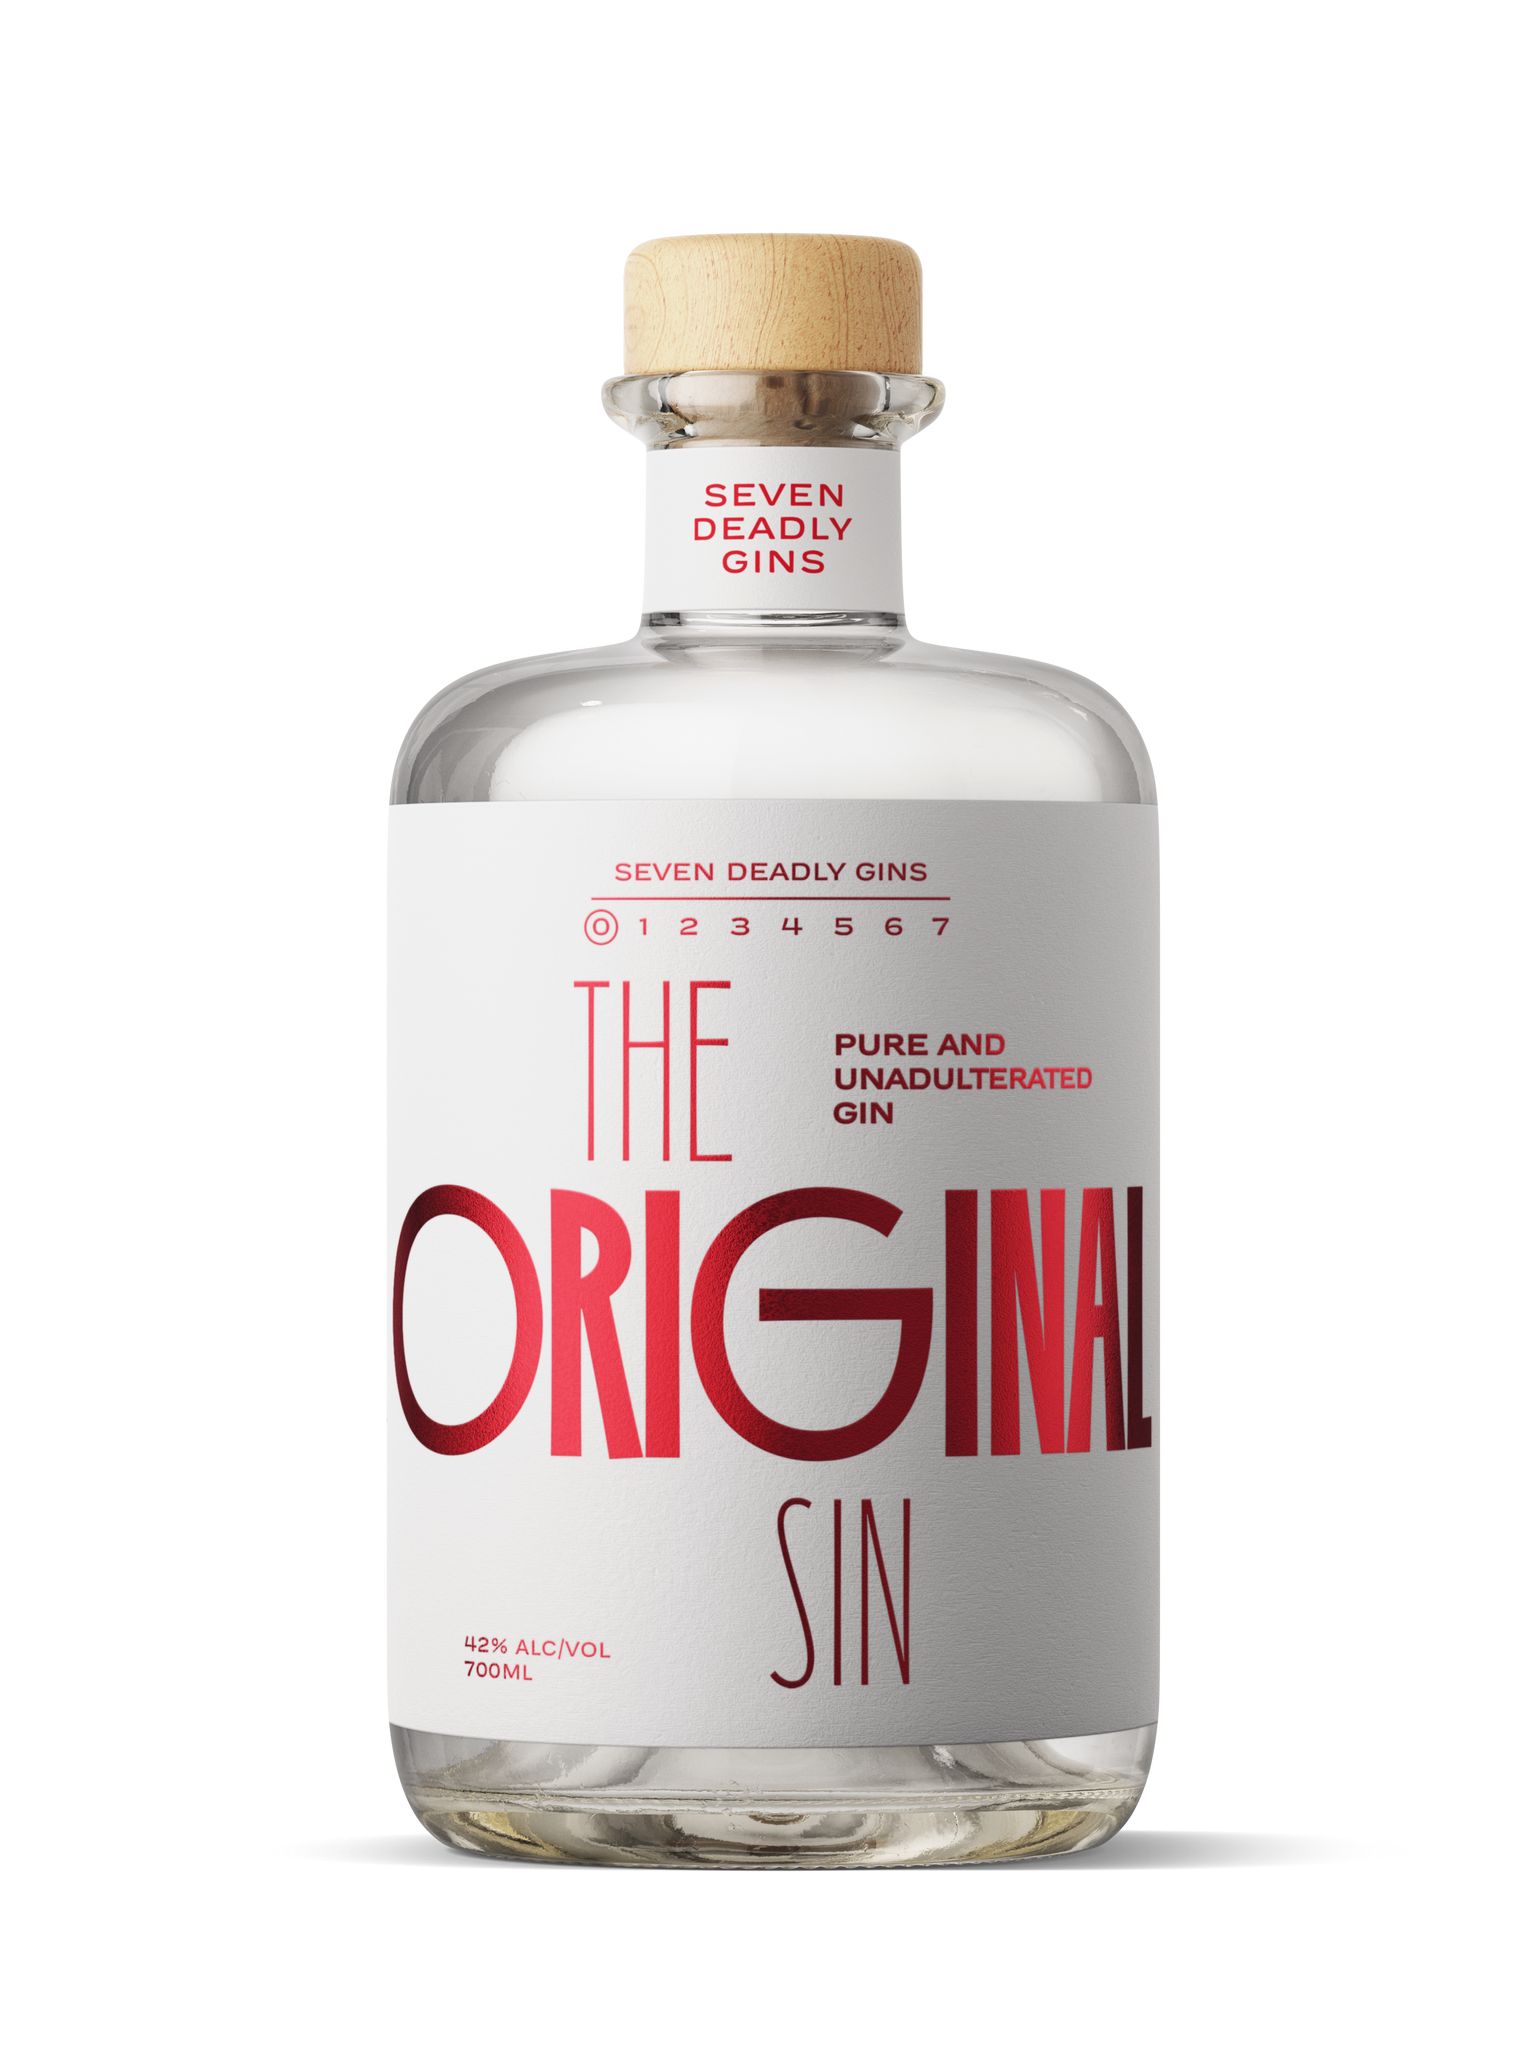 A Pure and Unadulterated Gin